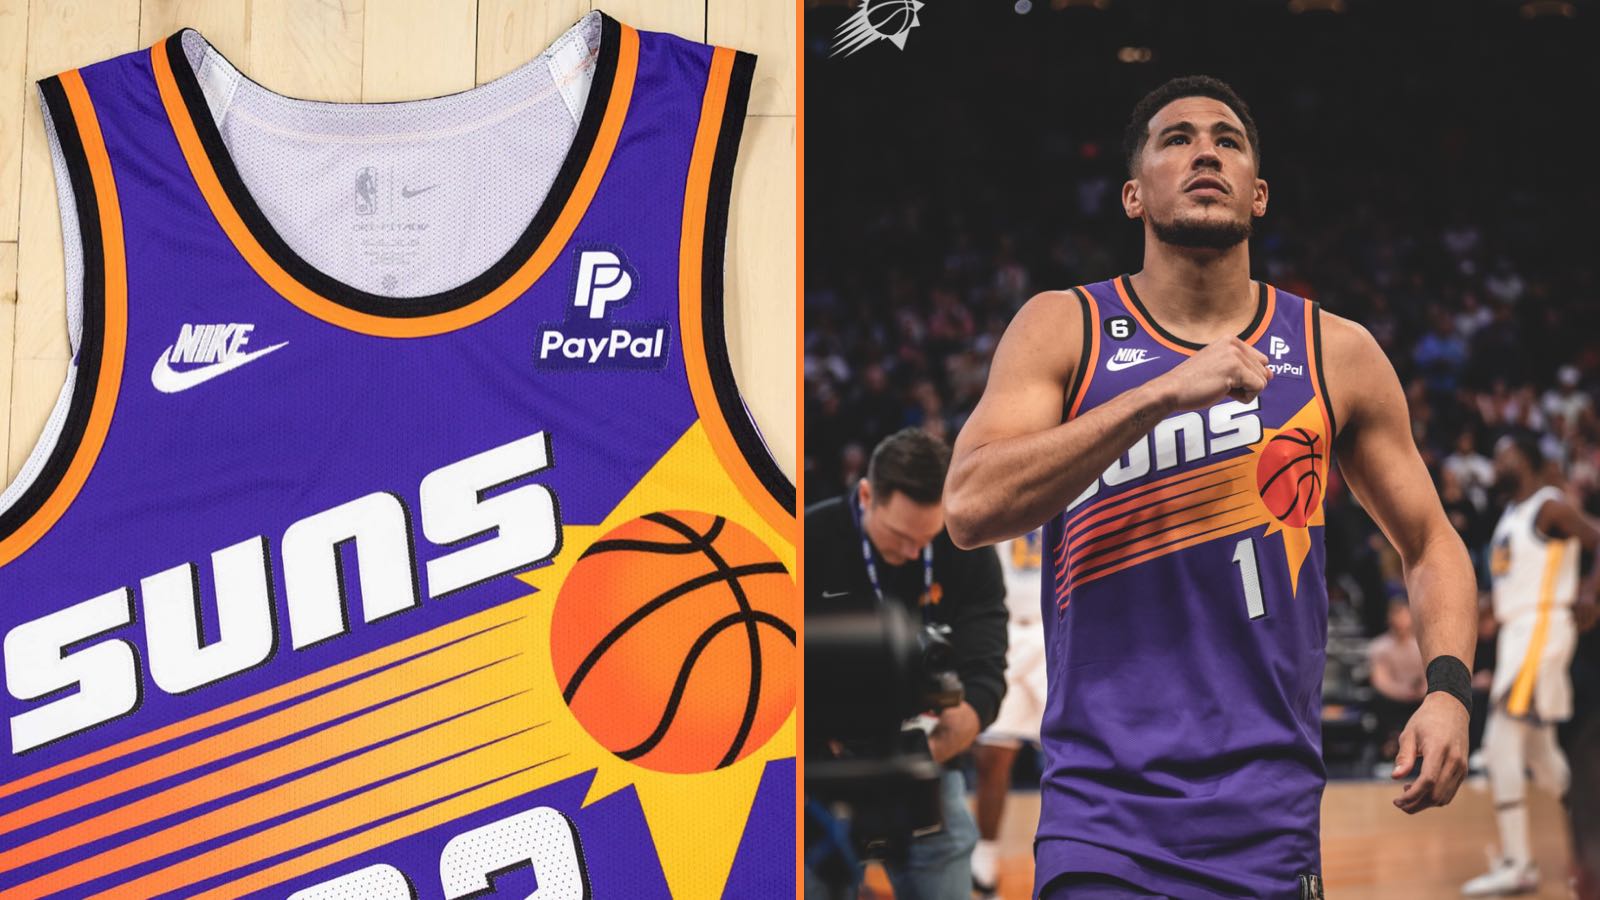 THEY'RE BACK: PHOENIX SUNS REVEAL CLASSIC UNIFORM INSPIRED BY 1992